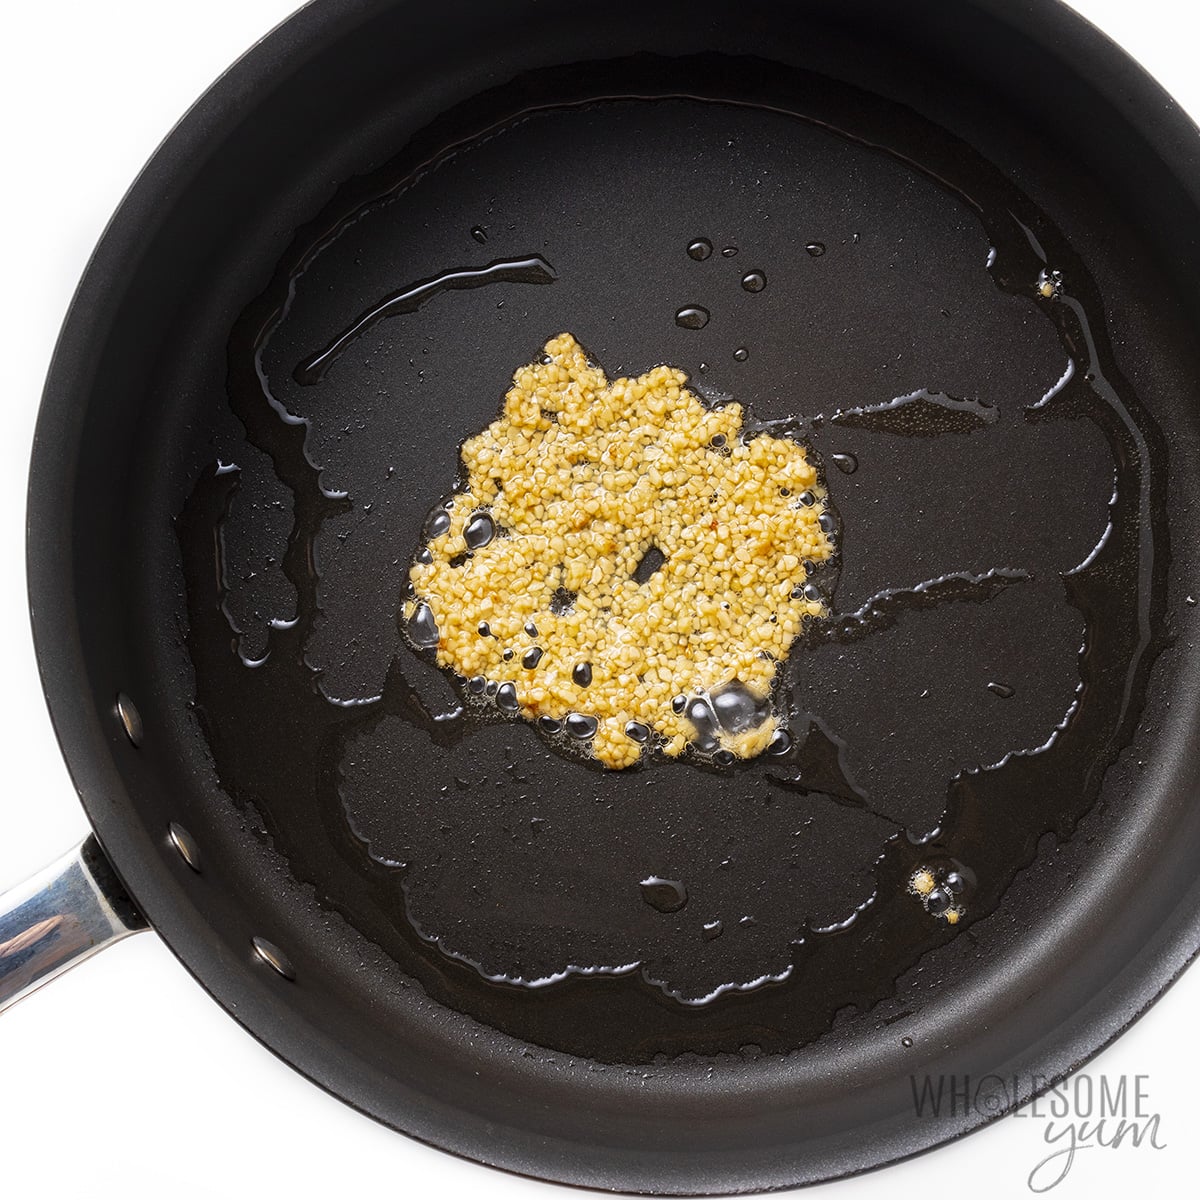 Garlic and oil in a skillet.